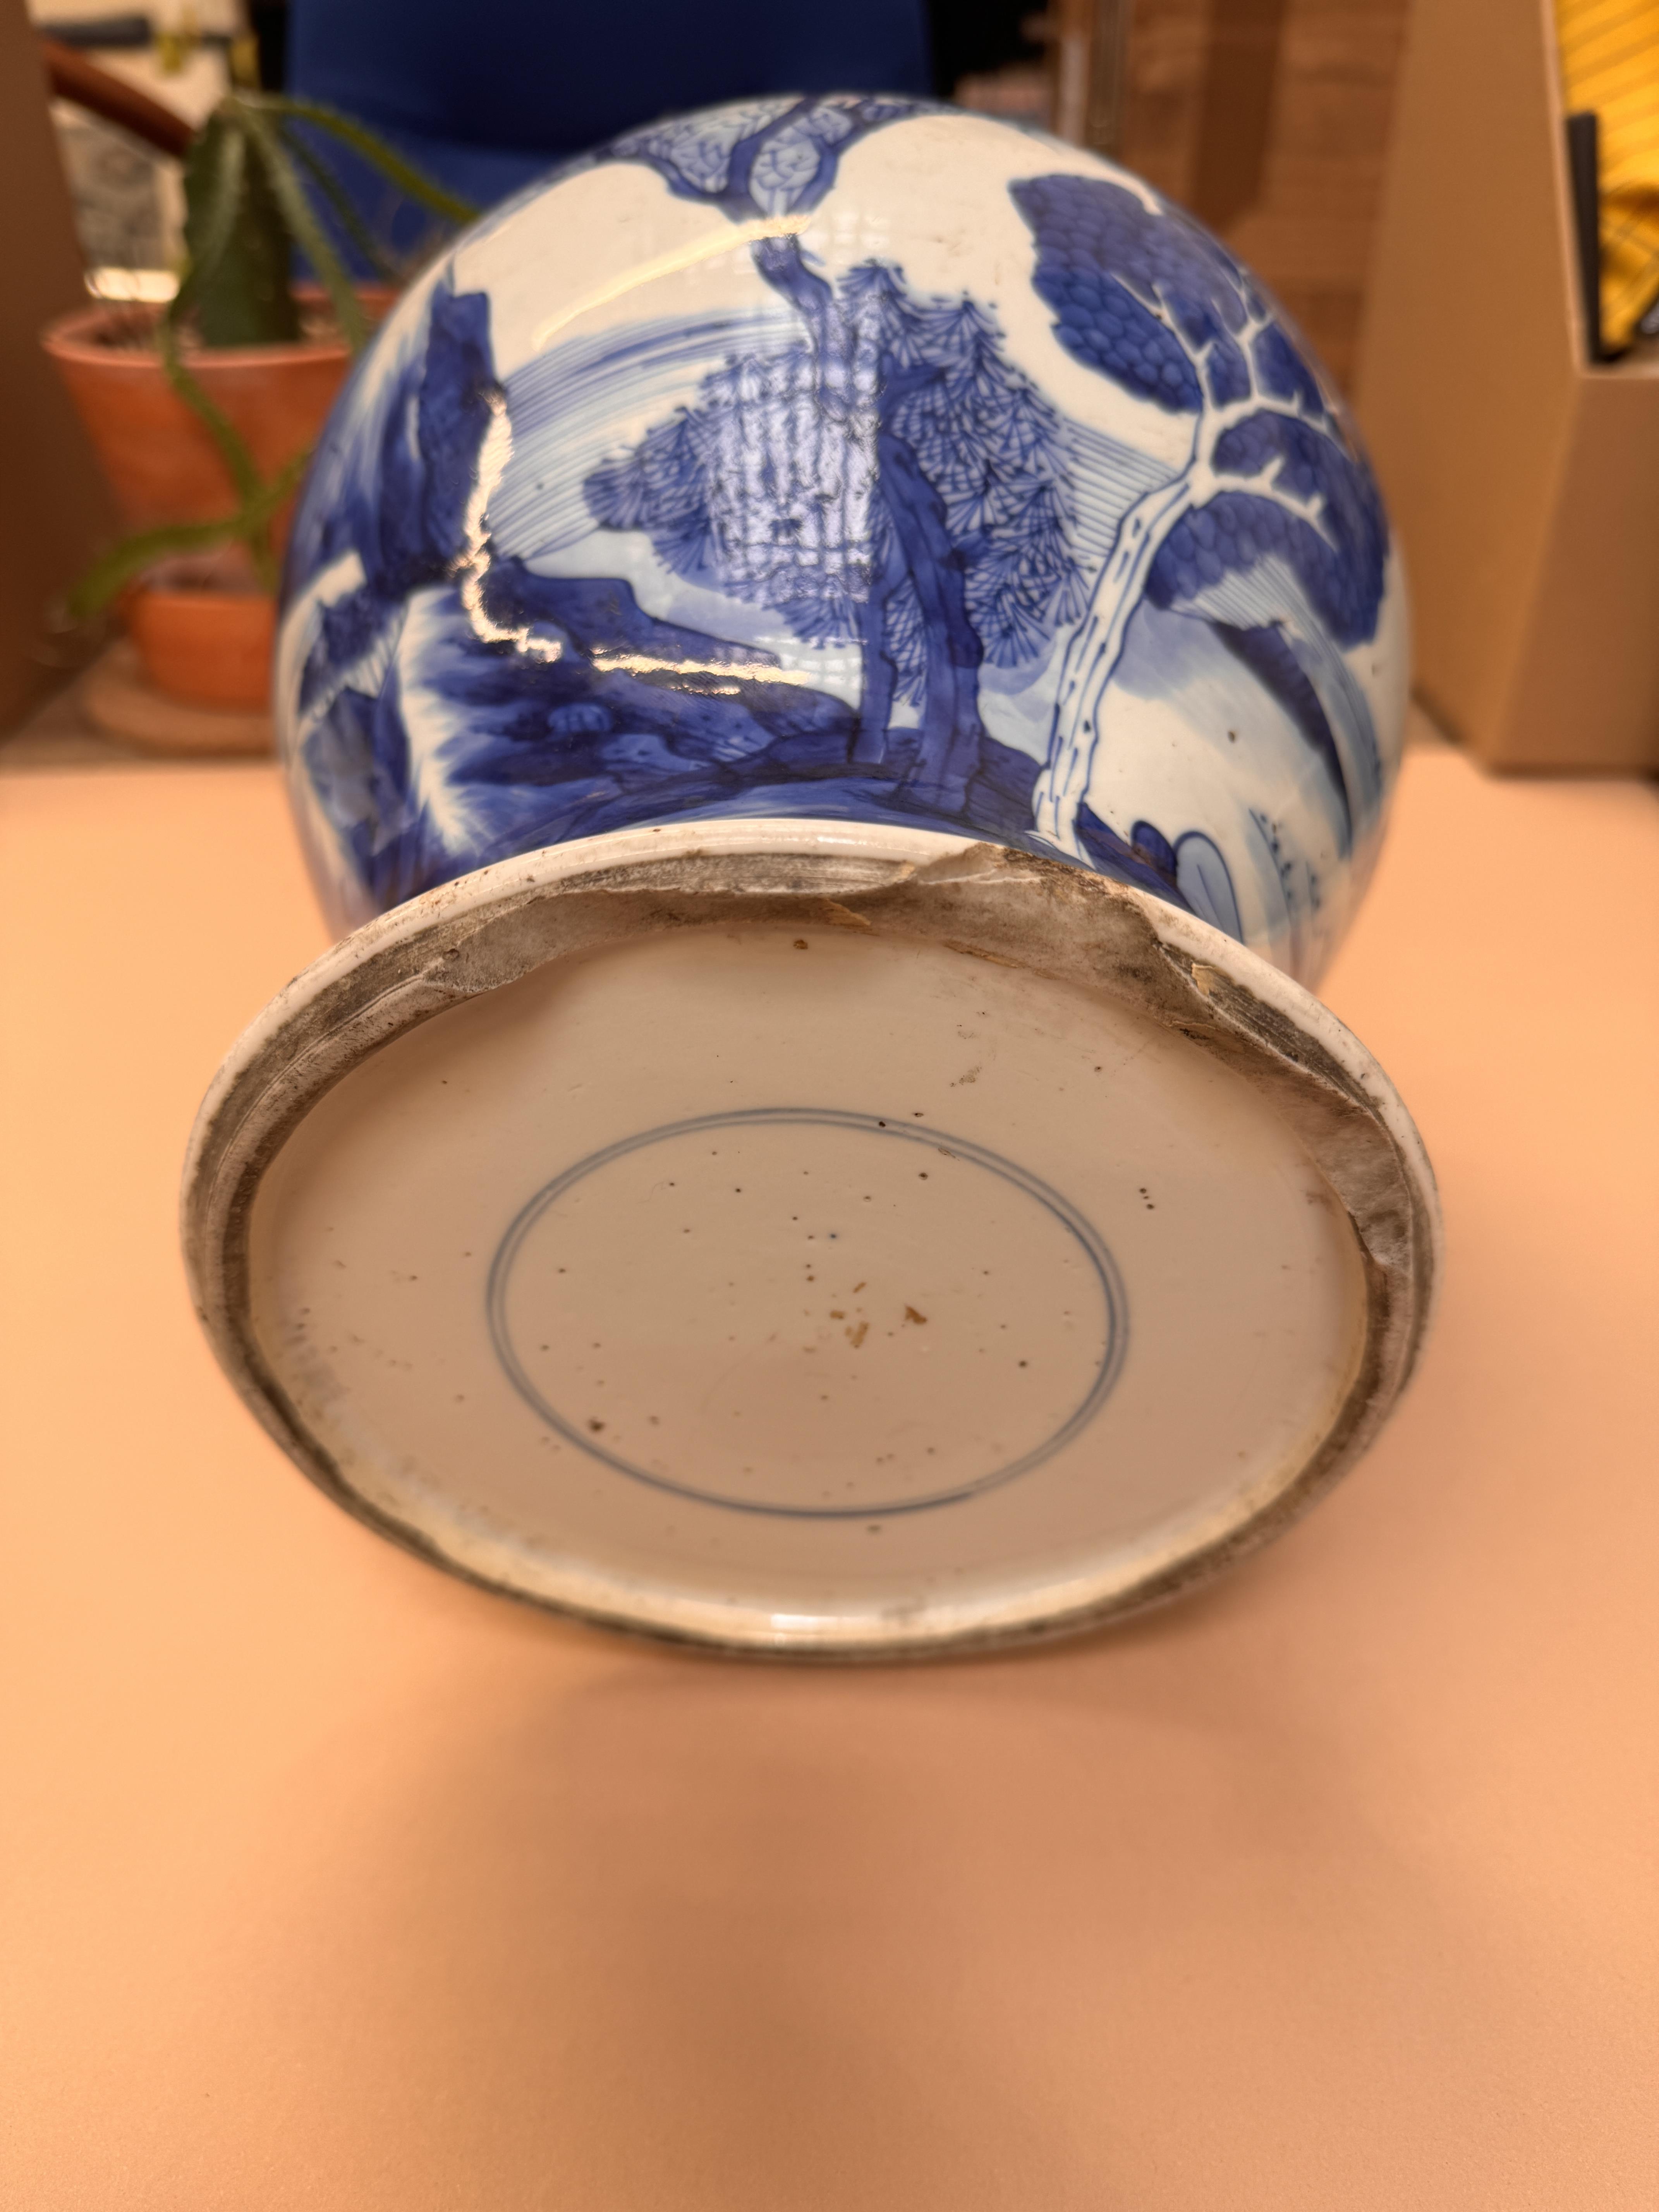 A CHINESE BLUE AND WHITE 'LANDSCAPE' VASE 清康熙 青花山水圖紋瓶 - Image 7 of 22